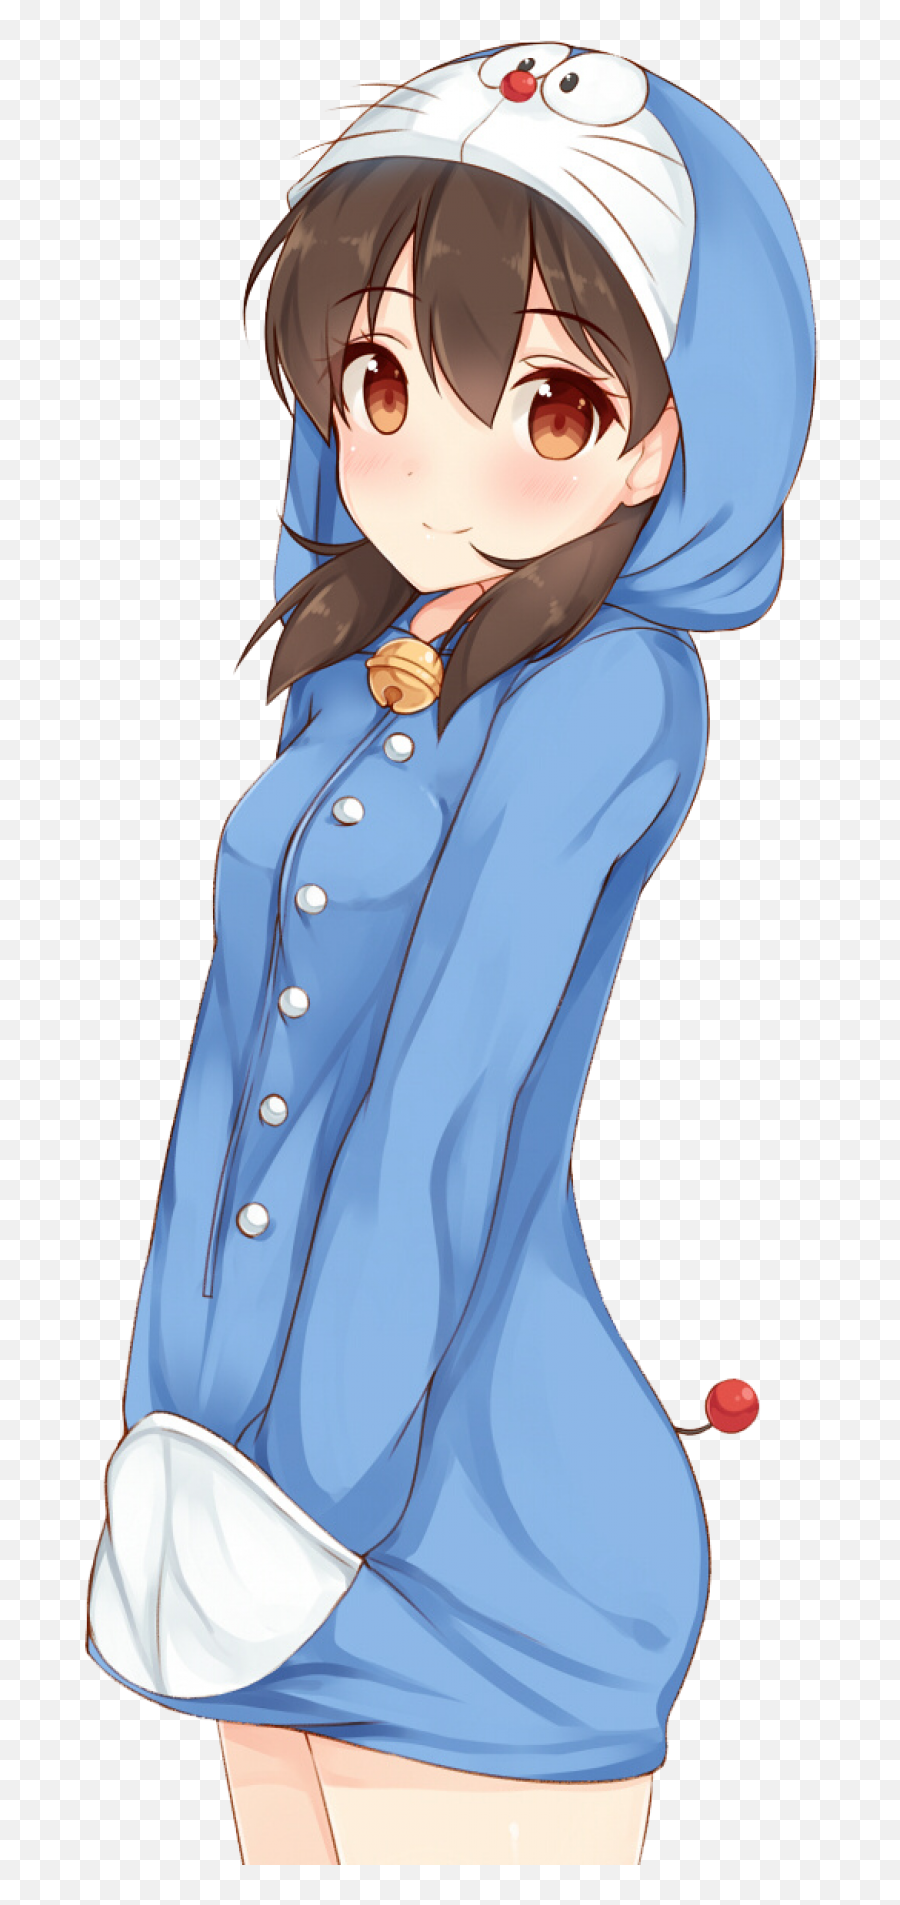 Animated Shy Girl Png Image - Purepng Free Transparent Cc0,Anime Smile Png